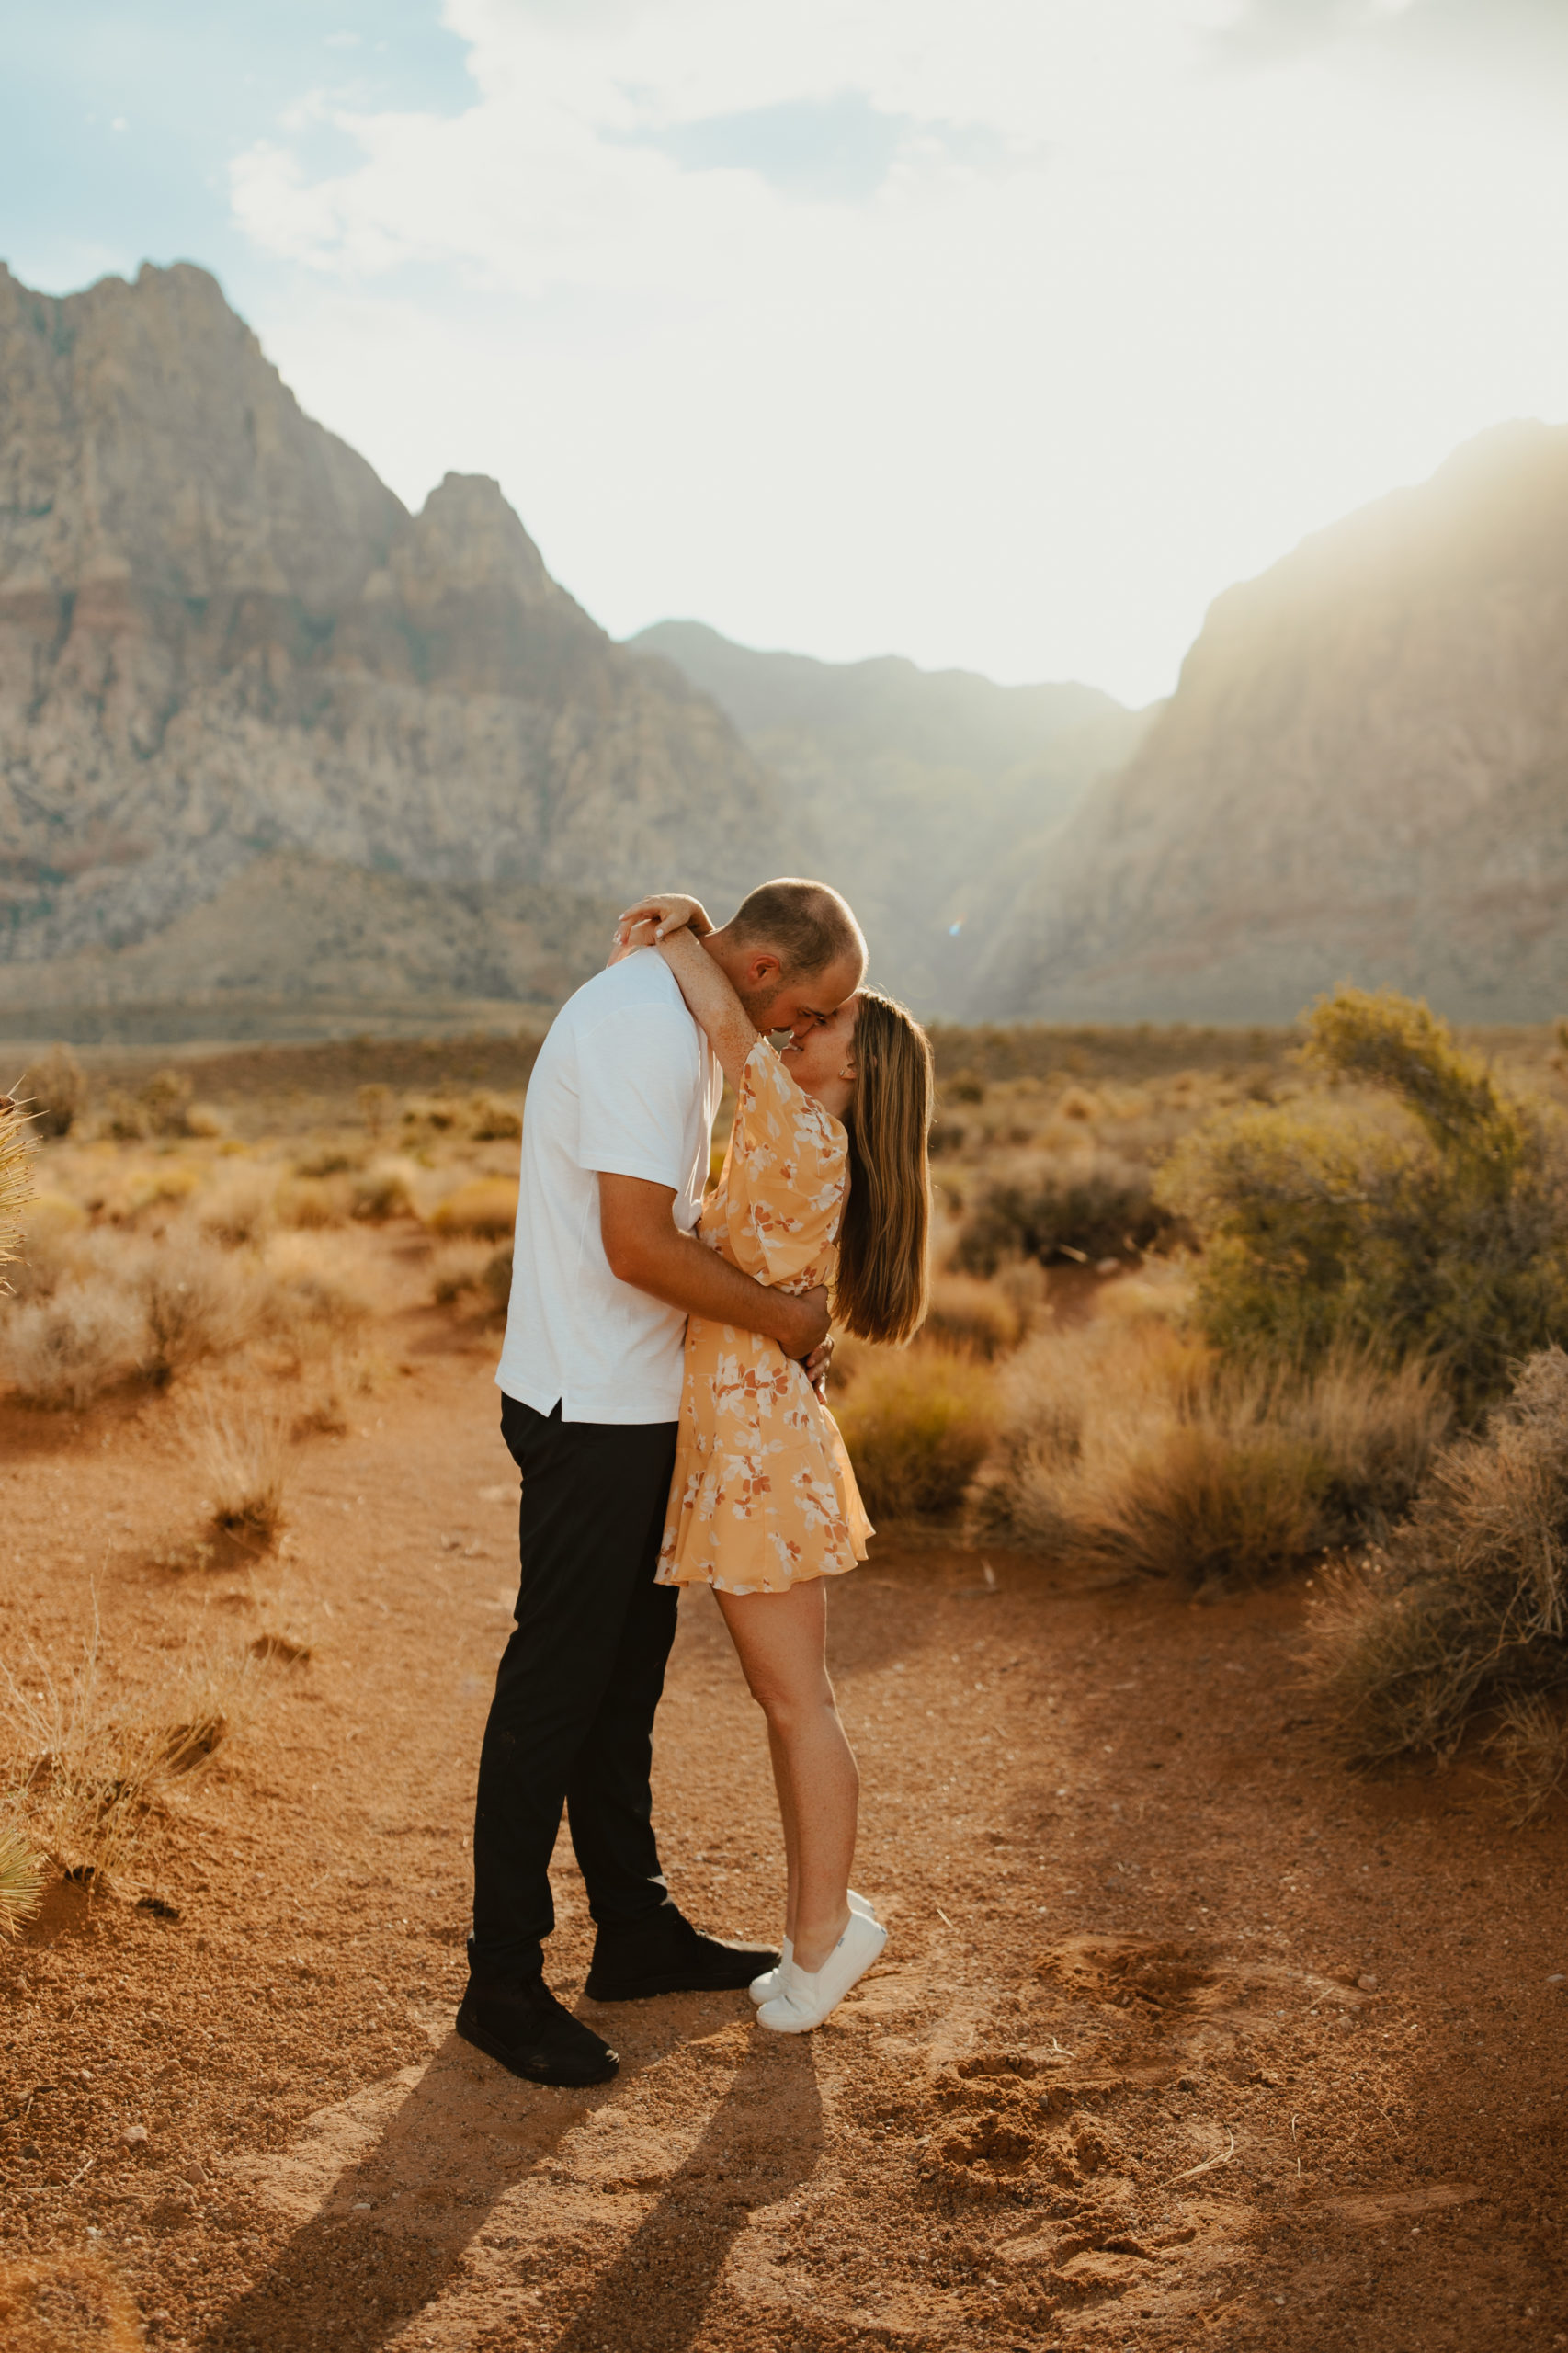 girlfriend standing on her tippy toes kissing her fiancé in the desert